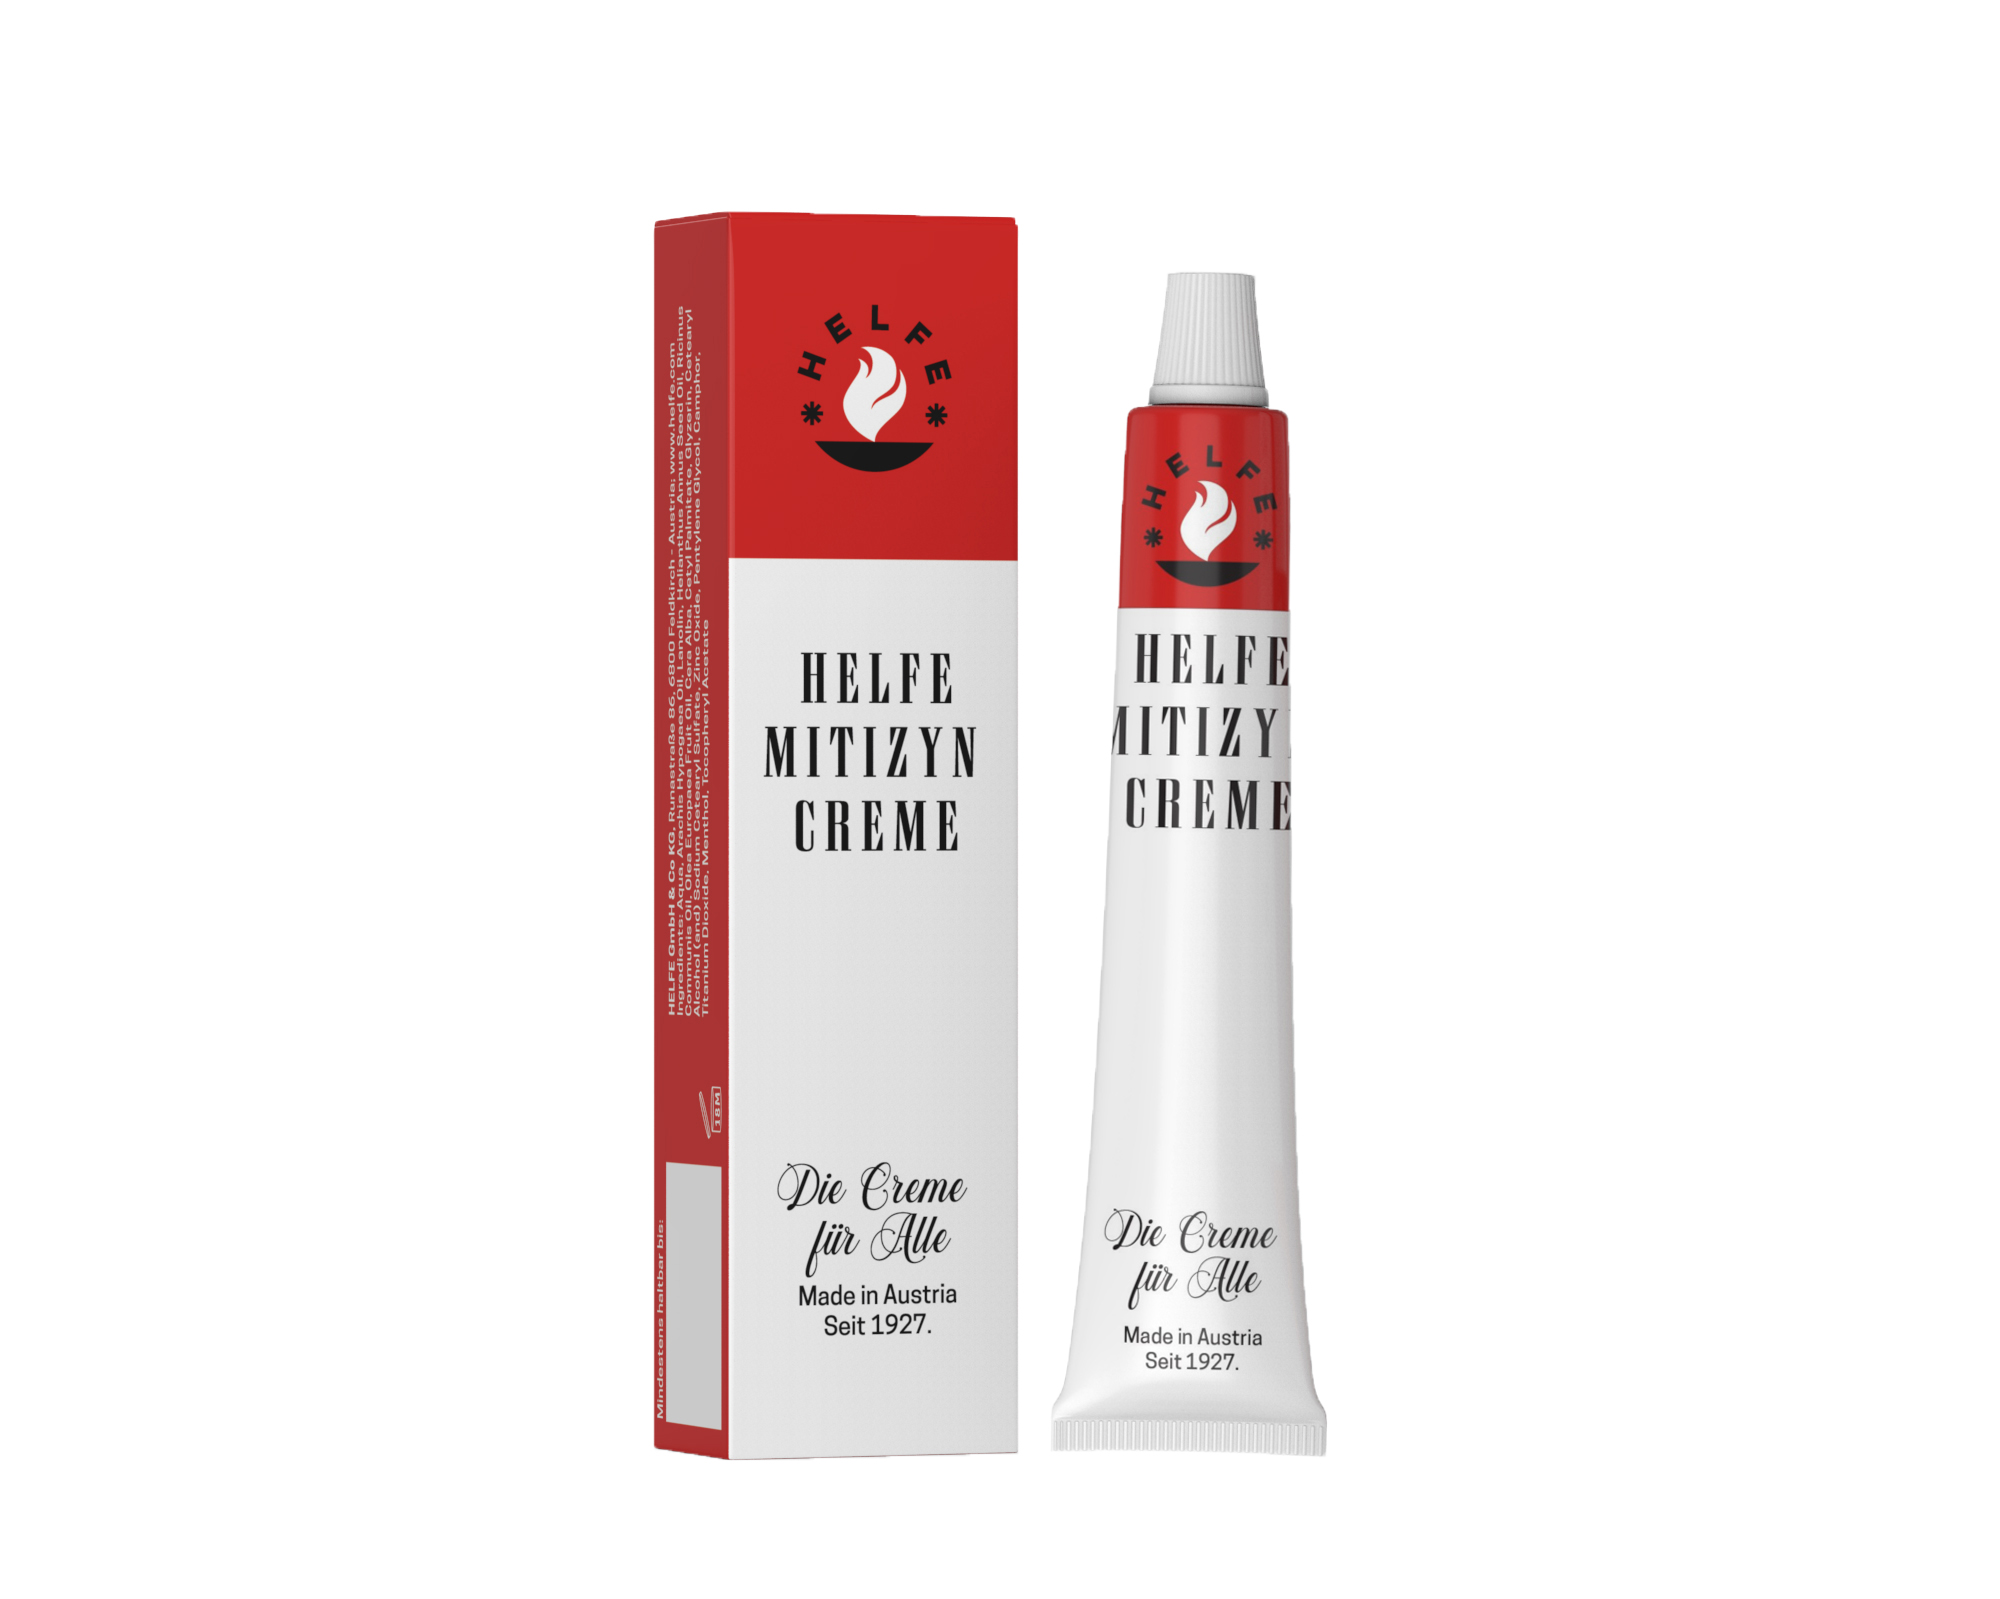 The Helfe Mitizyn cream has a skin-caring and healing effect